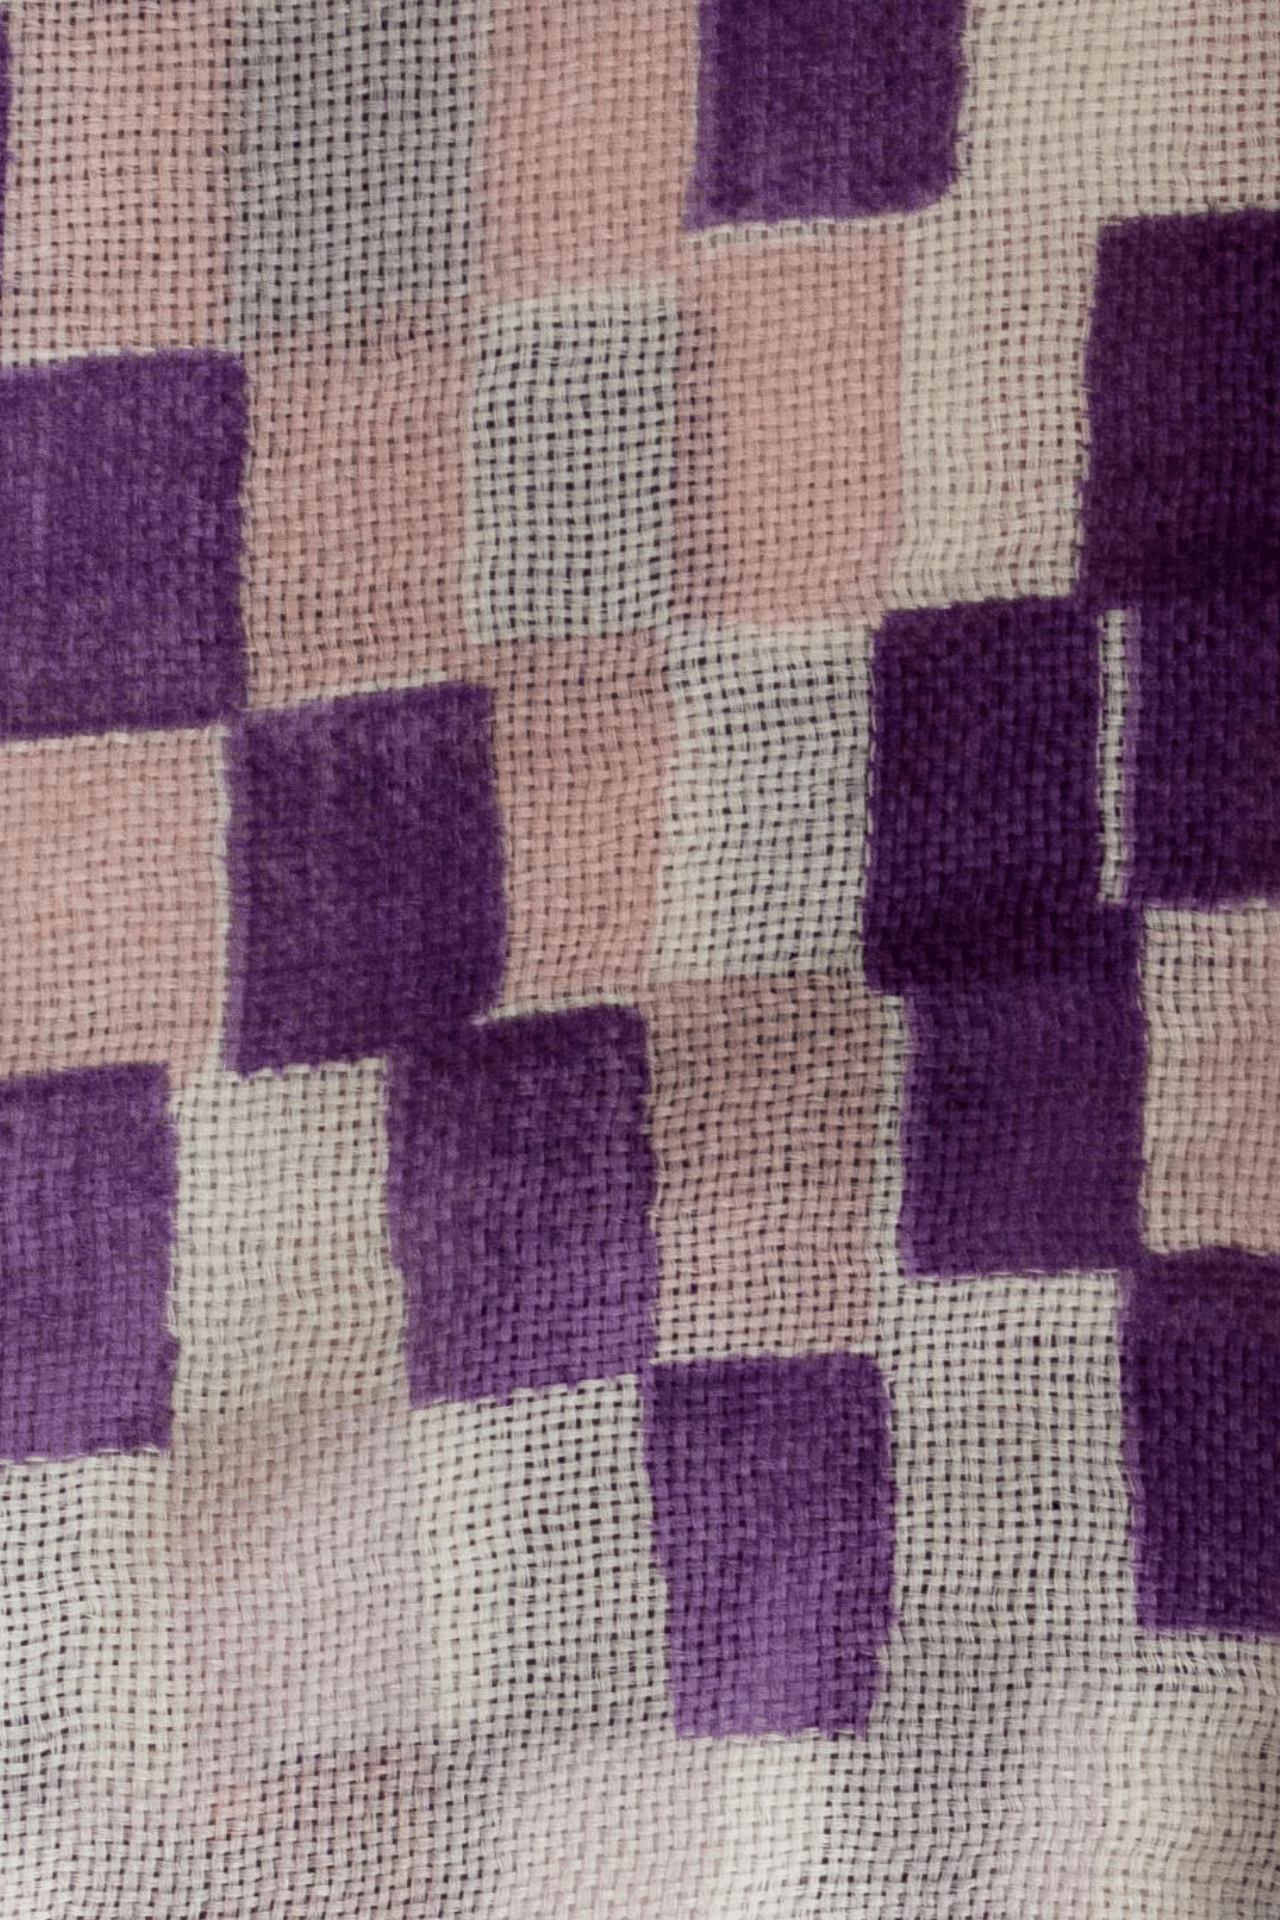 a close up of the Amethyst variation of the chequered love wool scarf. The scarf features an eclectic pattern of squares that appear painted in a variety of shades. Deep royal purple, a medium mauve shade, a pastel pink, and the white linen of the scarf. 